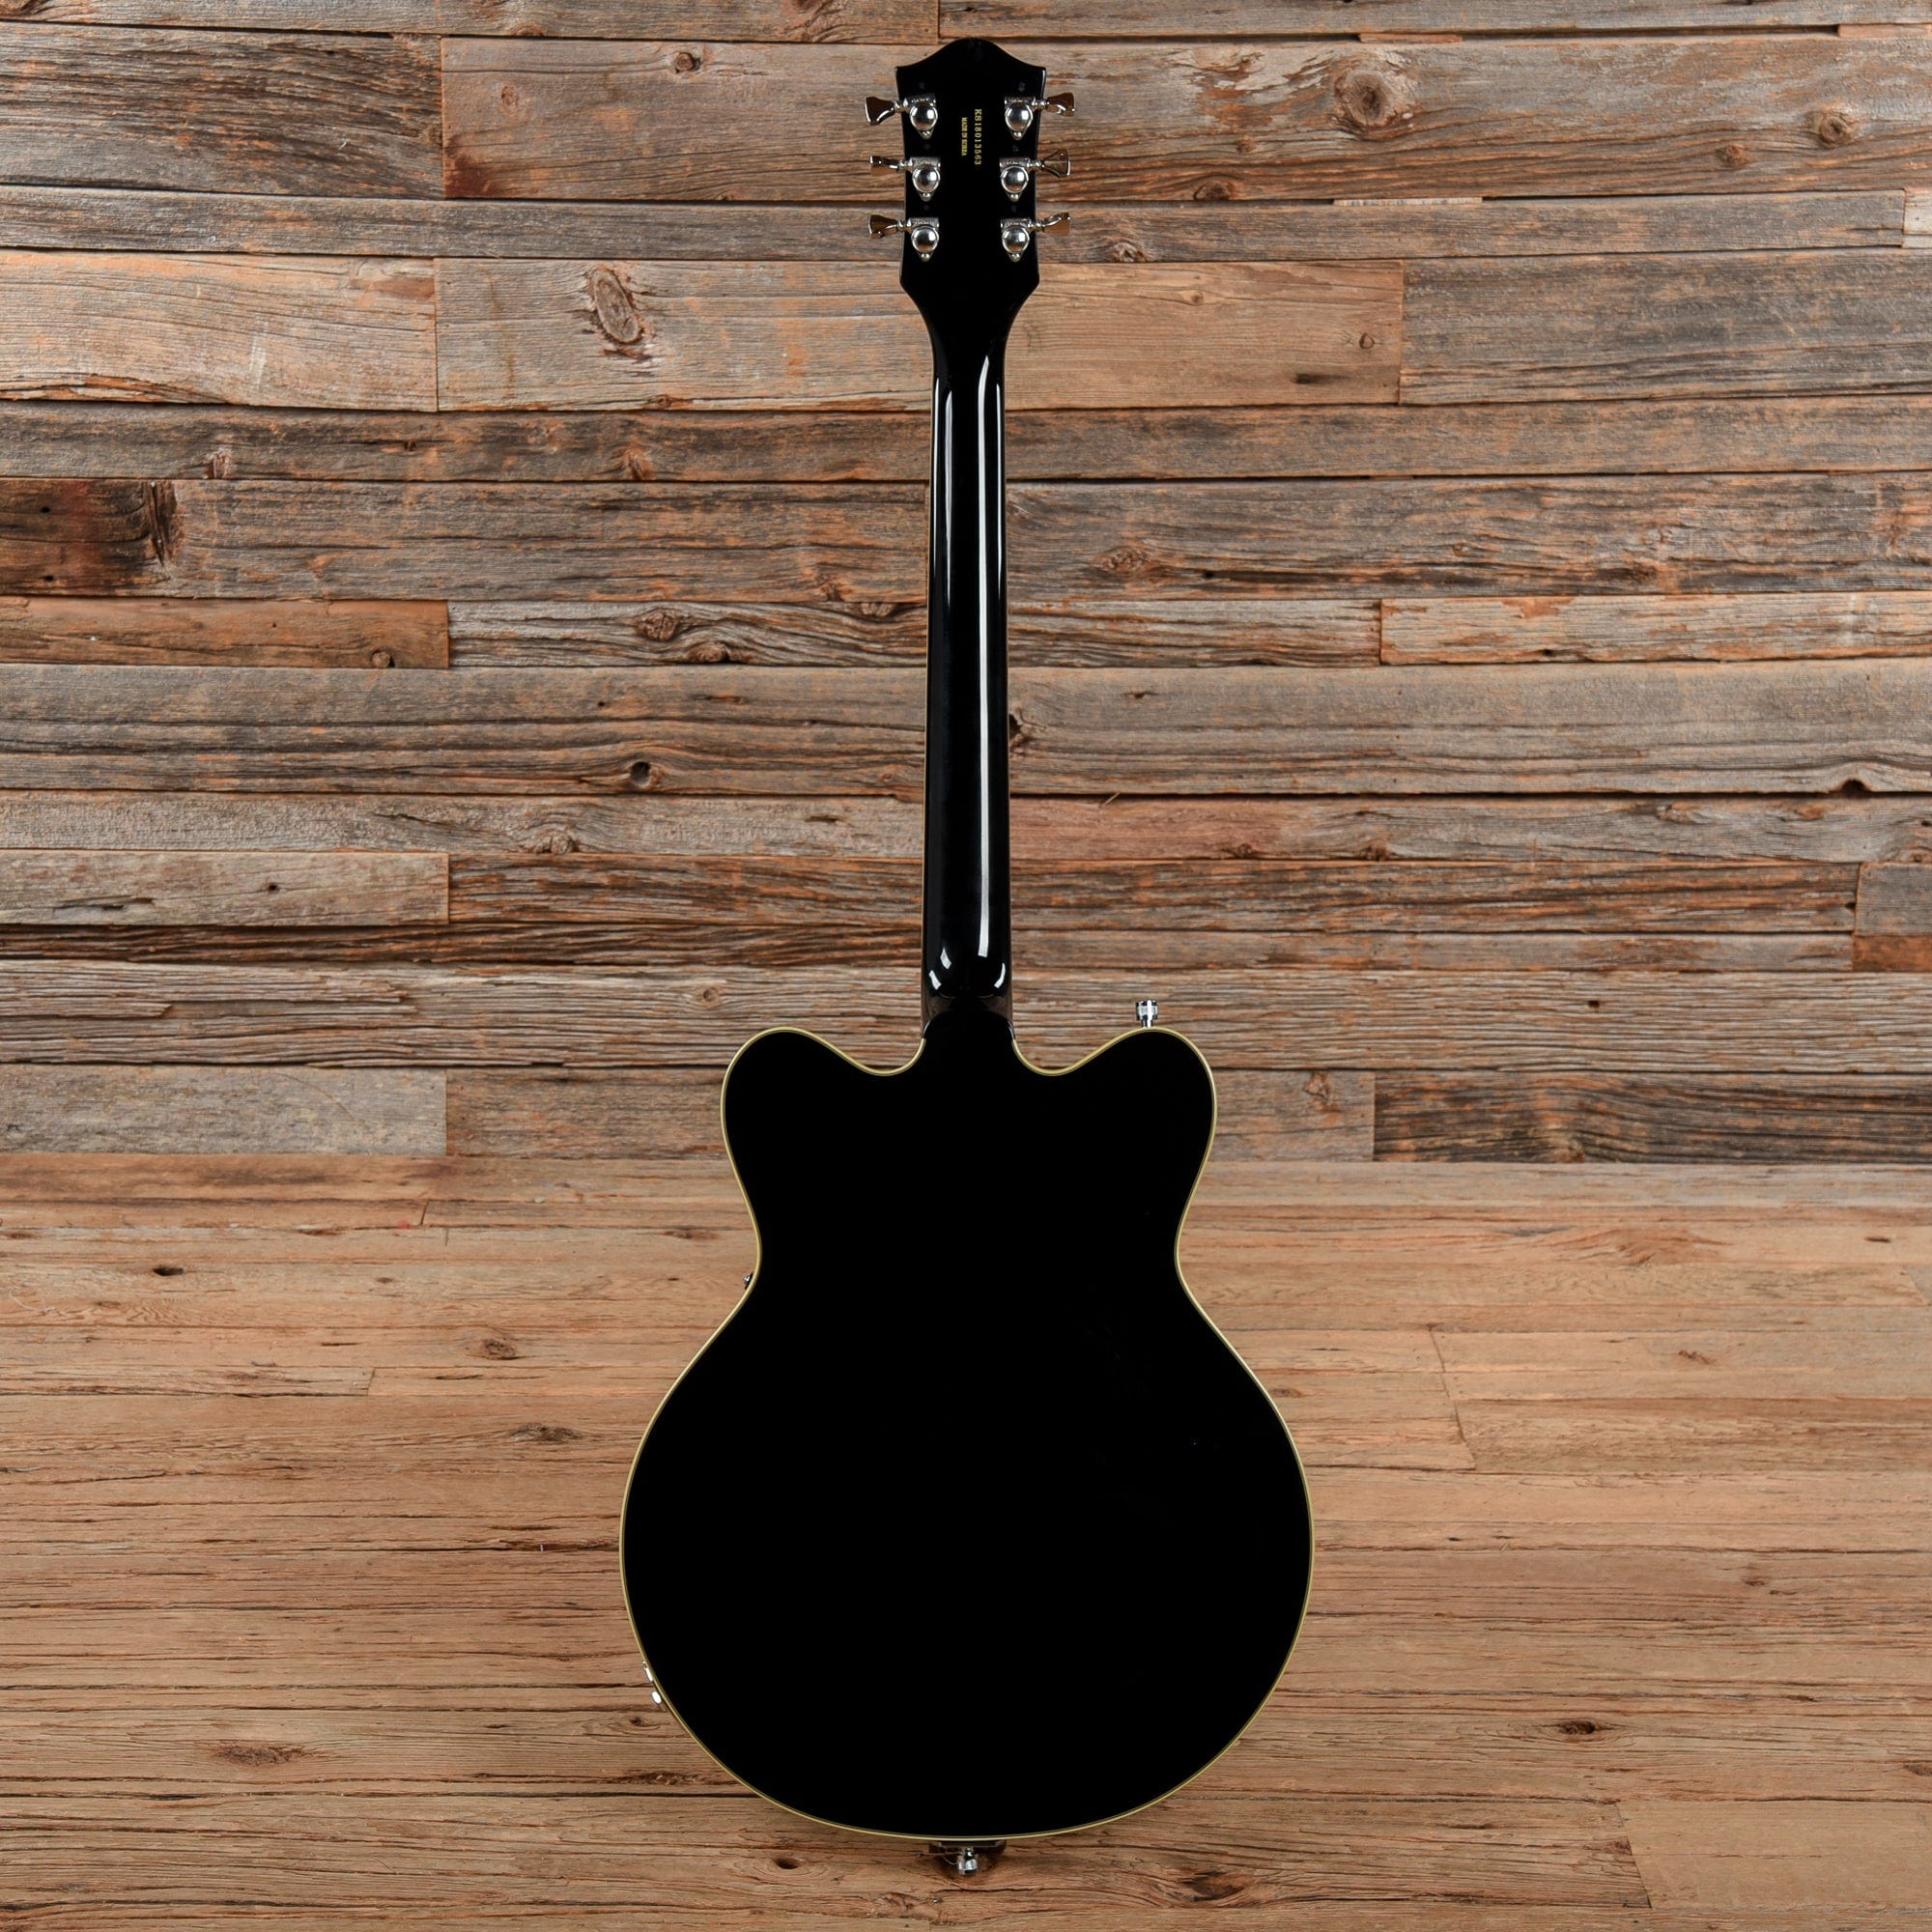 Gretsch G5622T Electromatic Center Block Double Cutaway with Bigsby Black 2018 Electric Guitars / Semi-Hollow